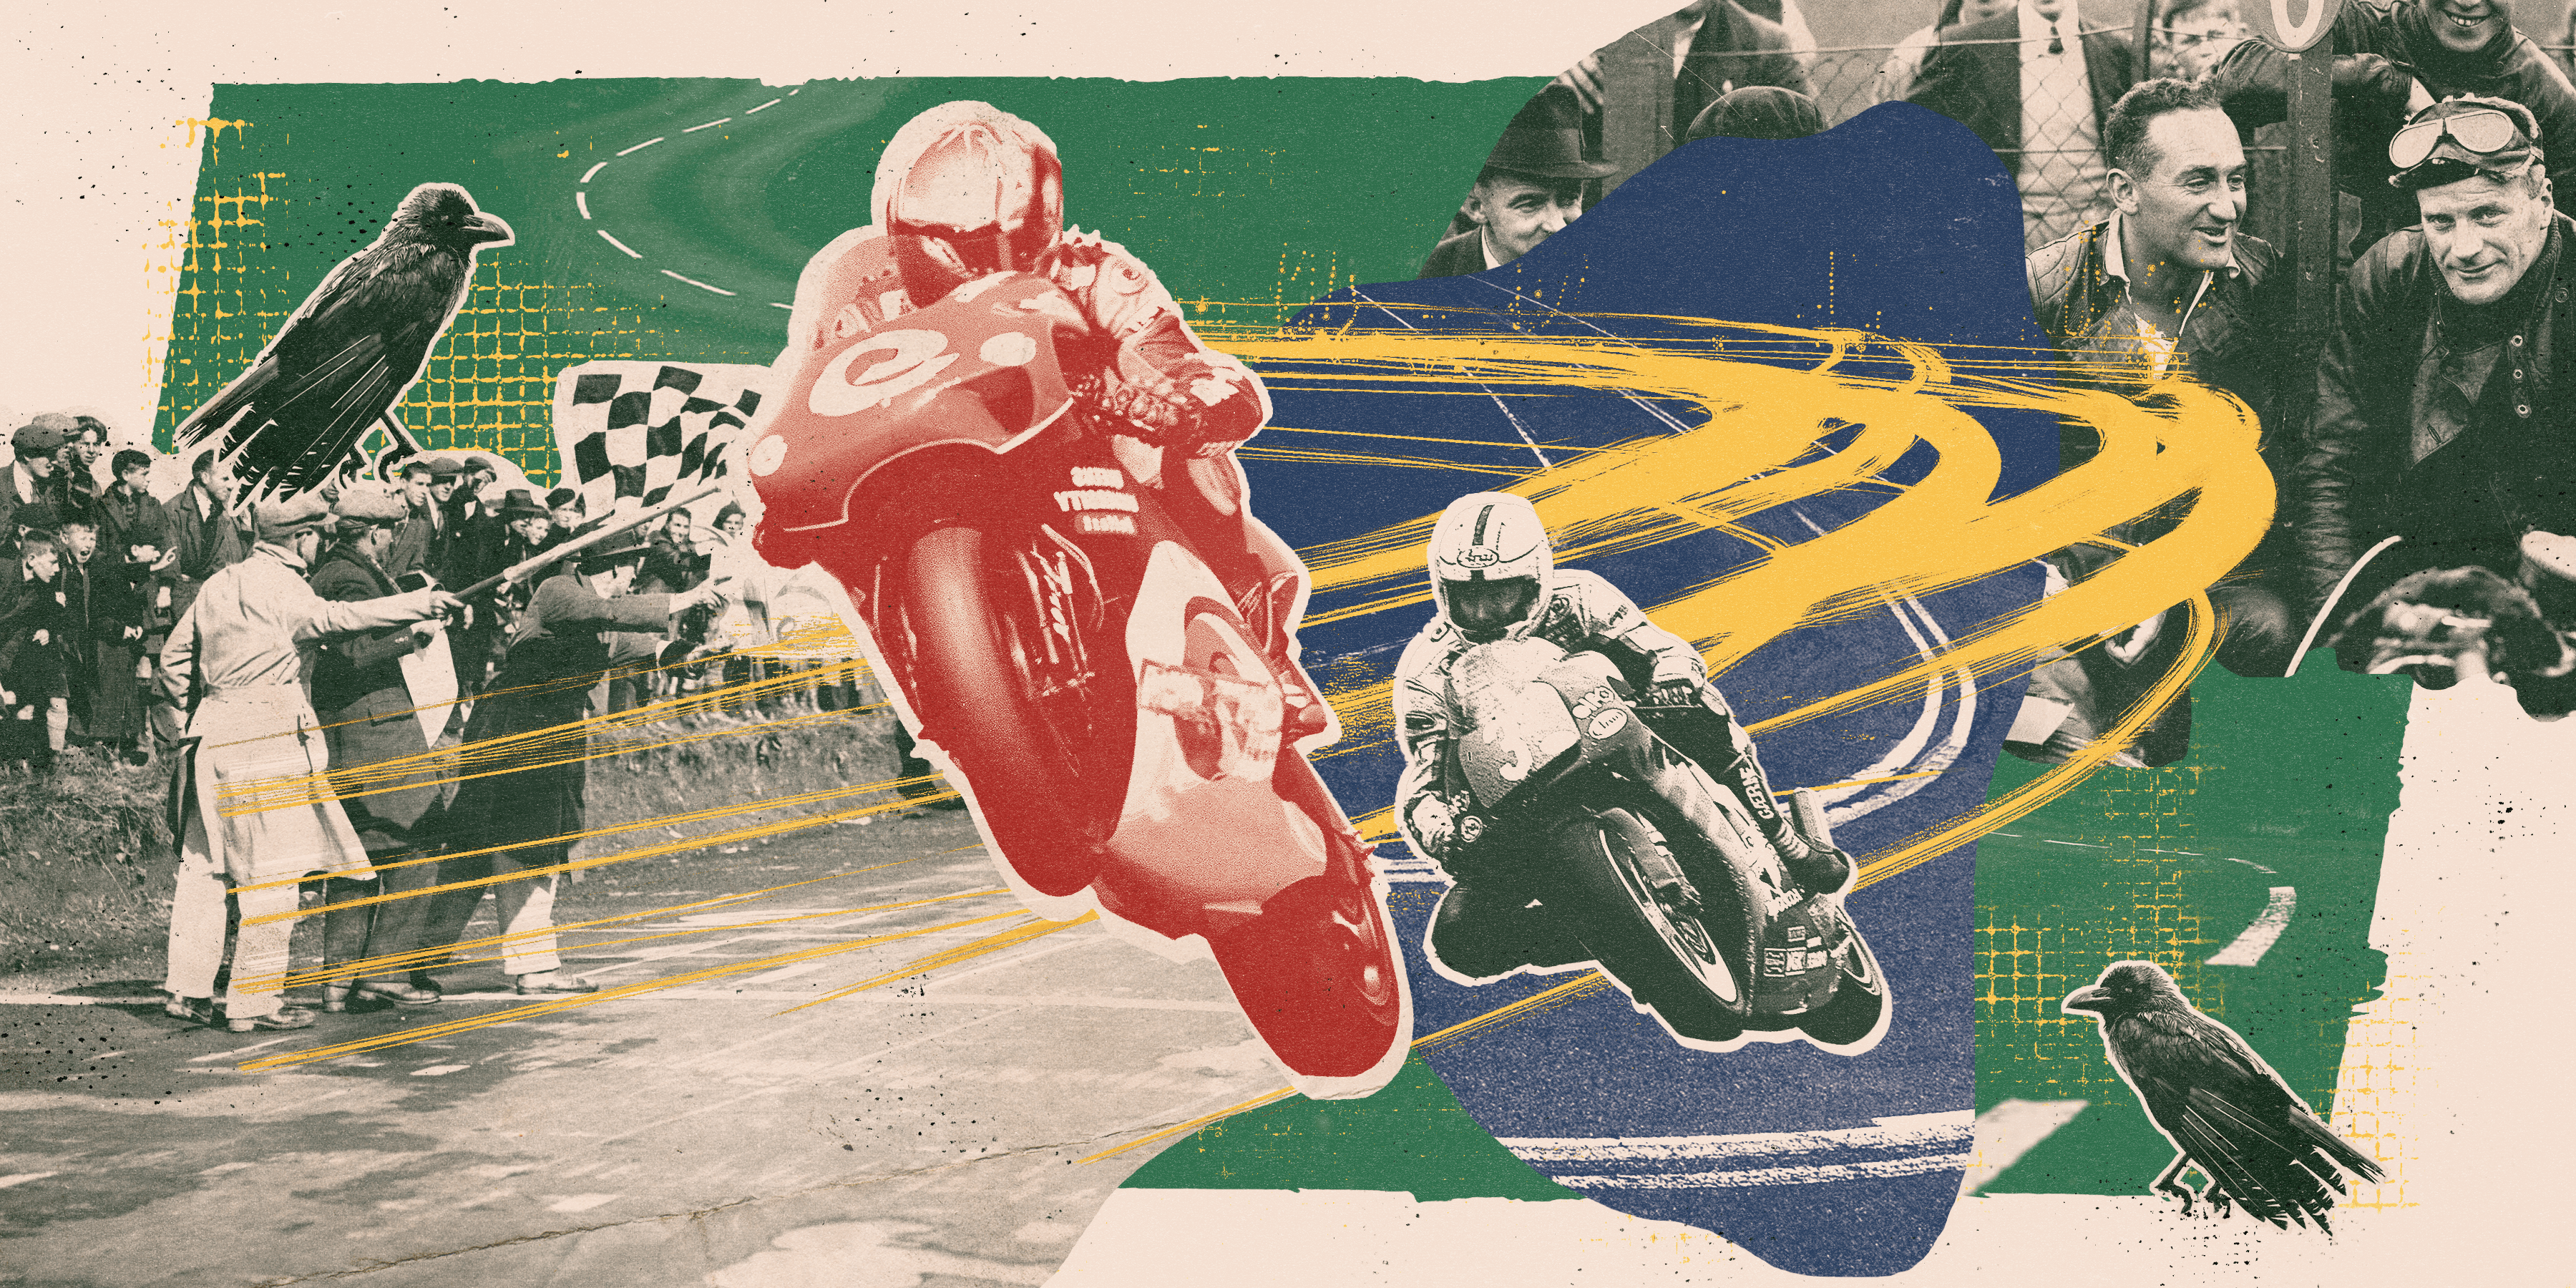 The Most Dangerous Road Racing on Earth is Under Threat